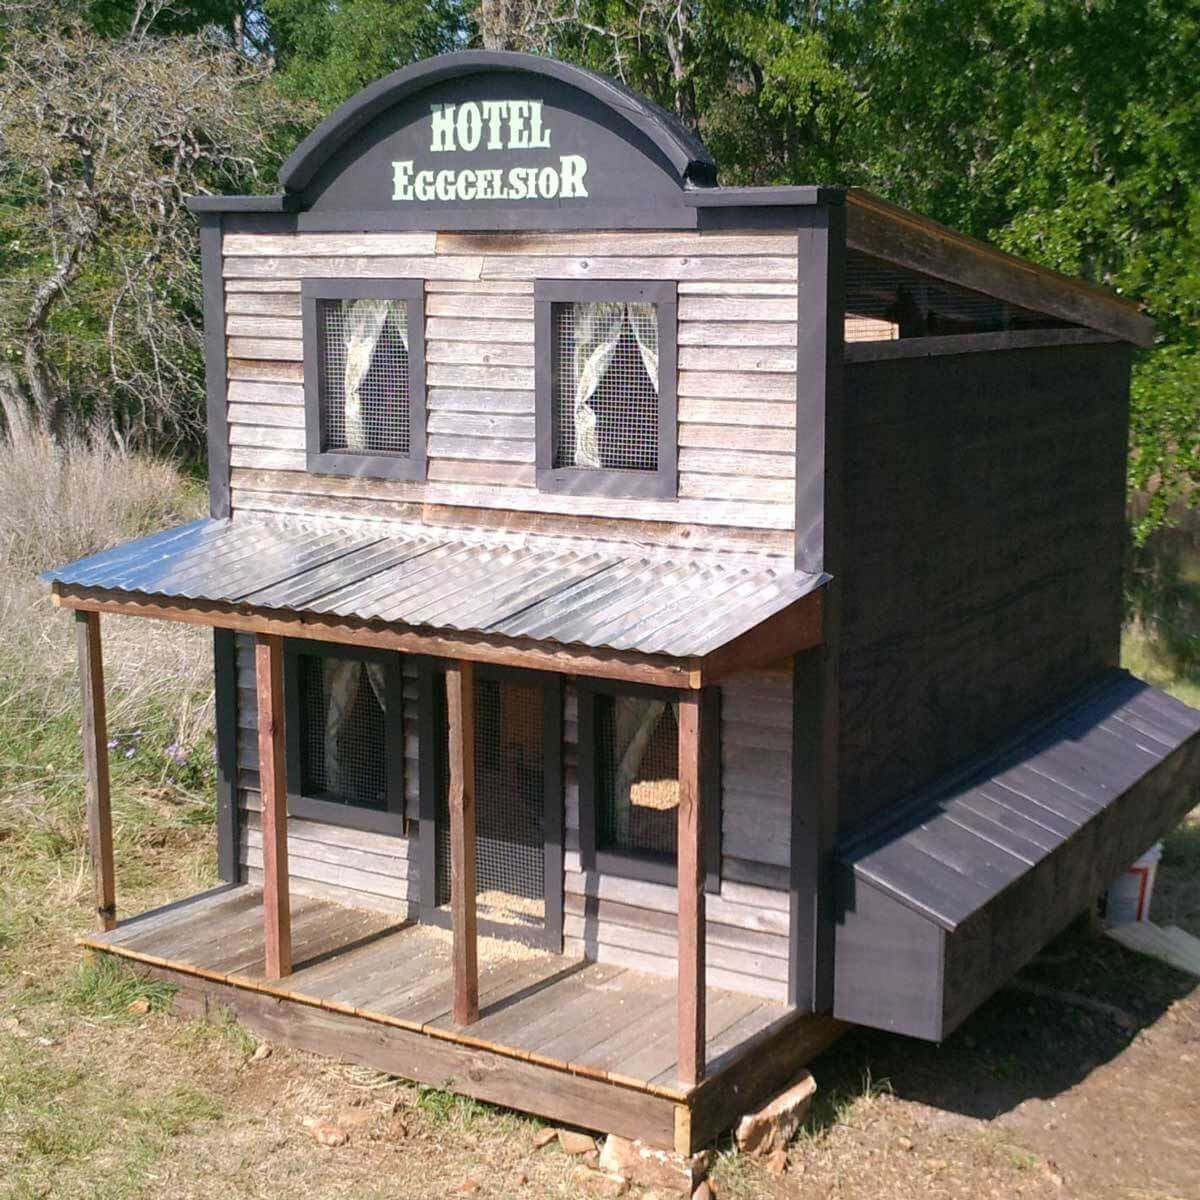 Backyard Chicken Coop Designs
 14 Wonderful and Wacky Chicken Coop Ideas — The Family